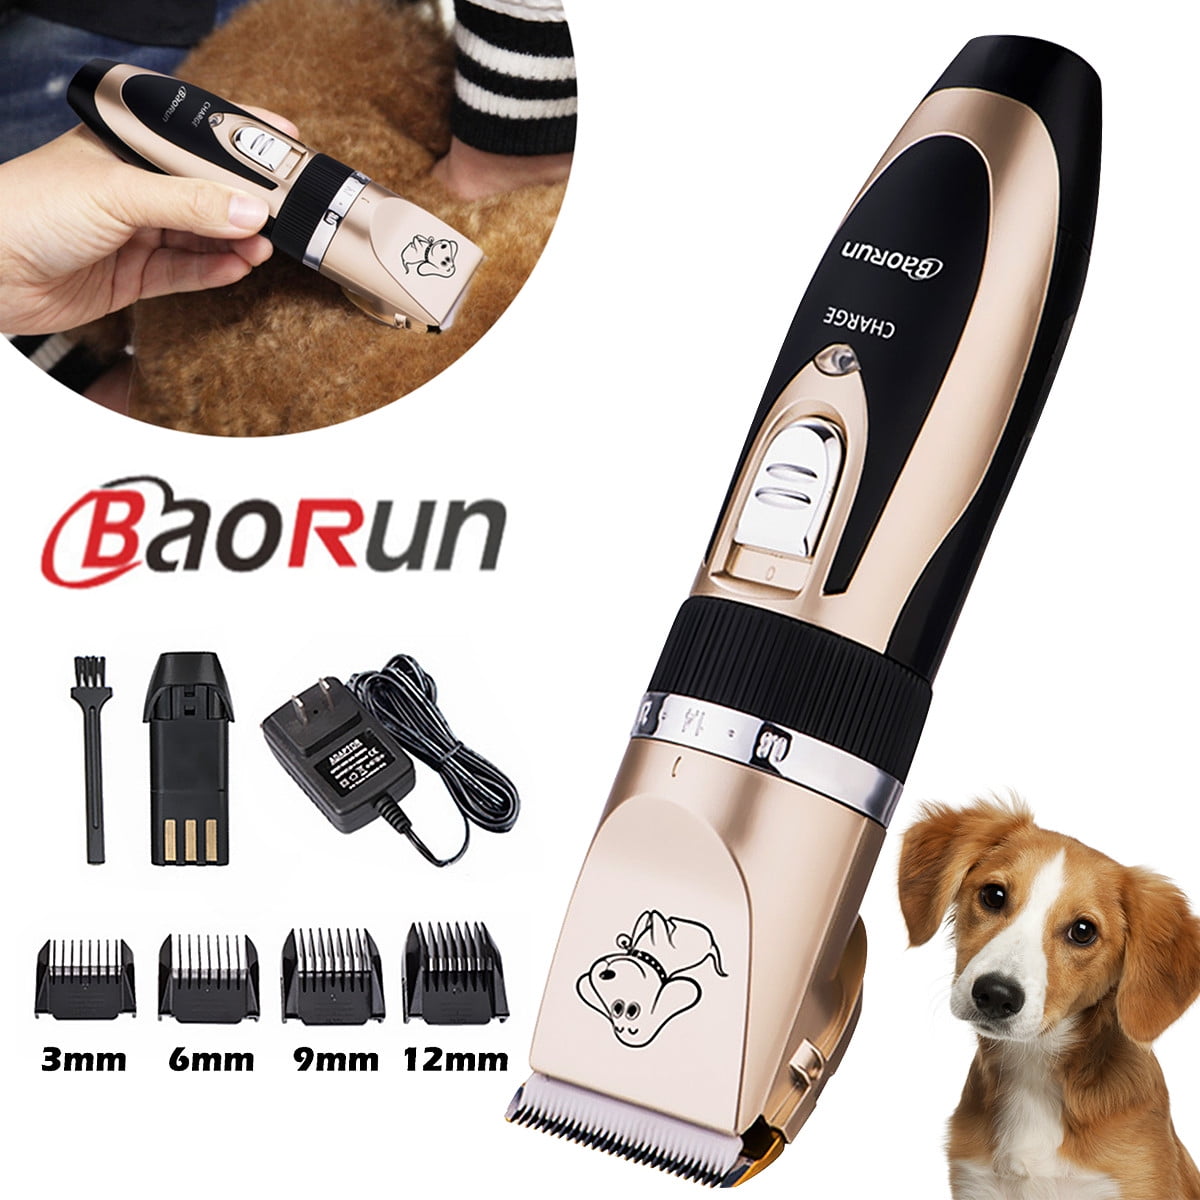 Dorical Dog Clippers Pet Clippers Rechargeable Cordless Dog Trimmer Pet Grooming Tool Professional Dog Hair Trimmer For Dogs Cats And Other Animals